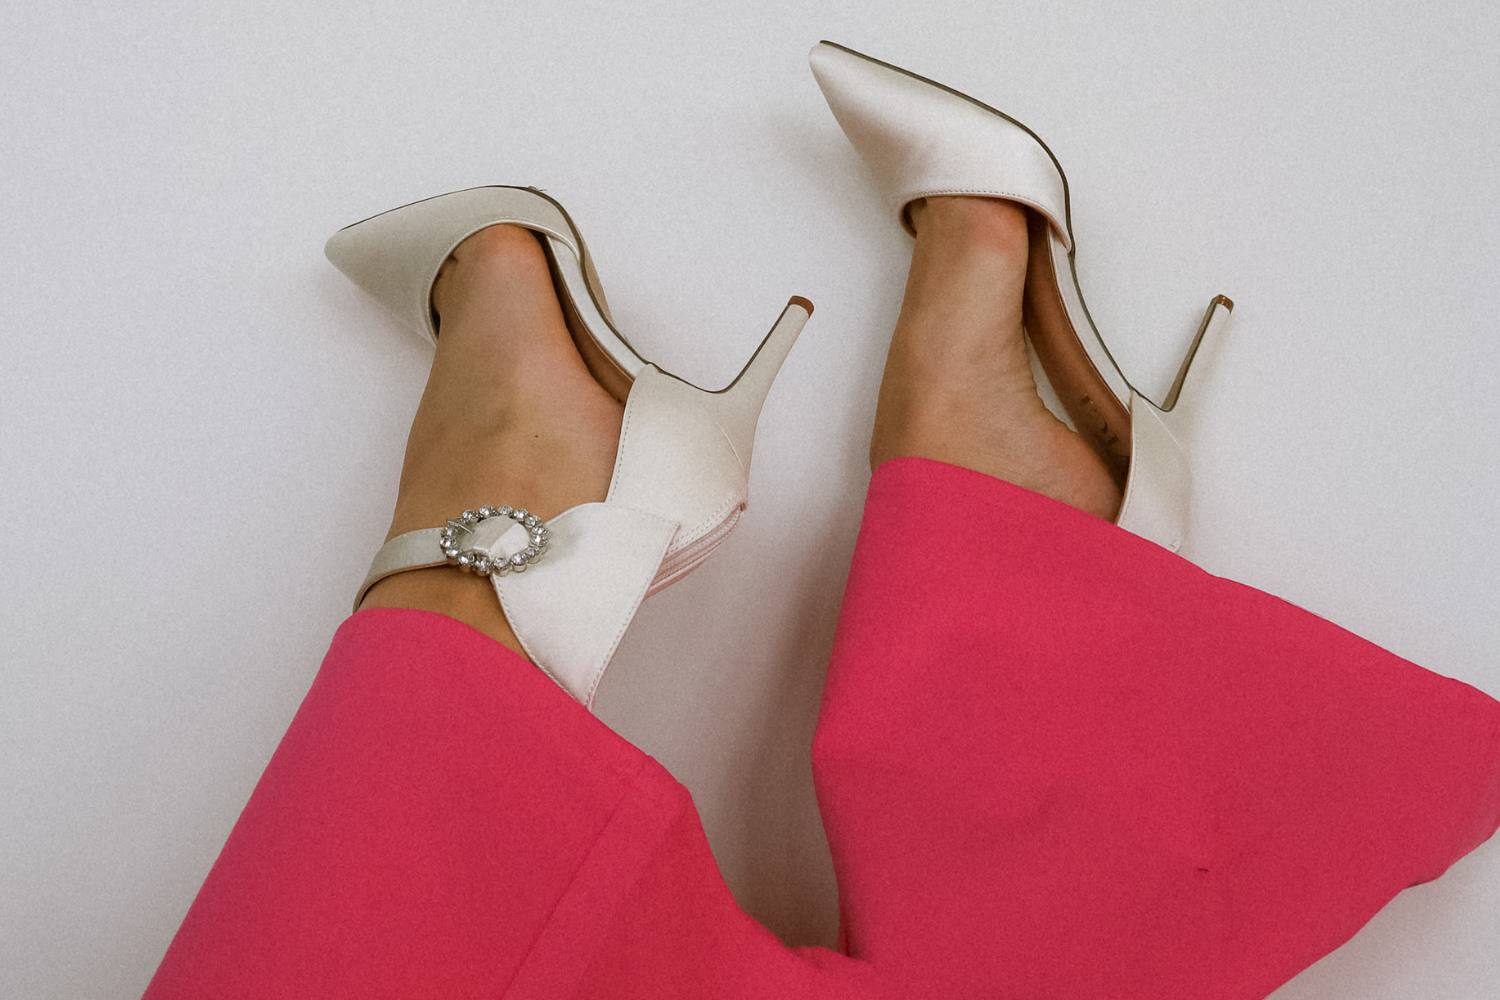 Women's feet in the air wearing white satin heels and hot pink pants